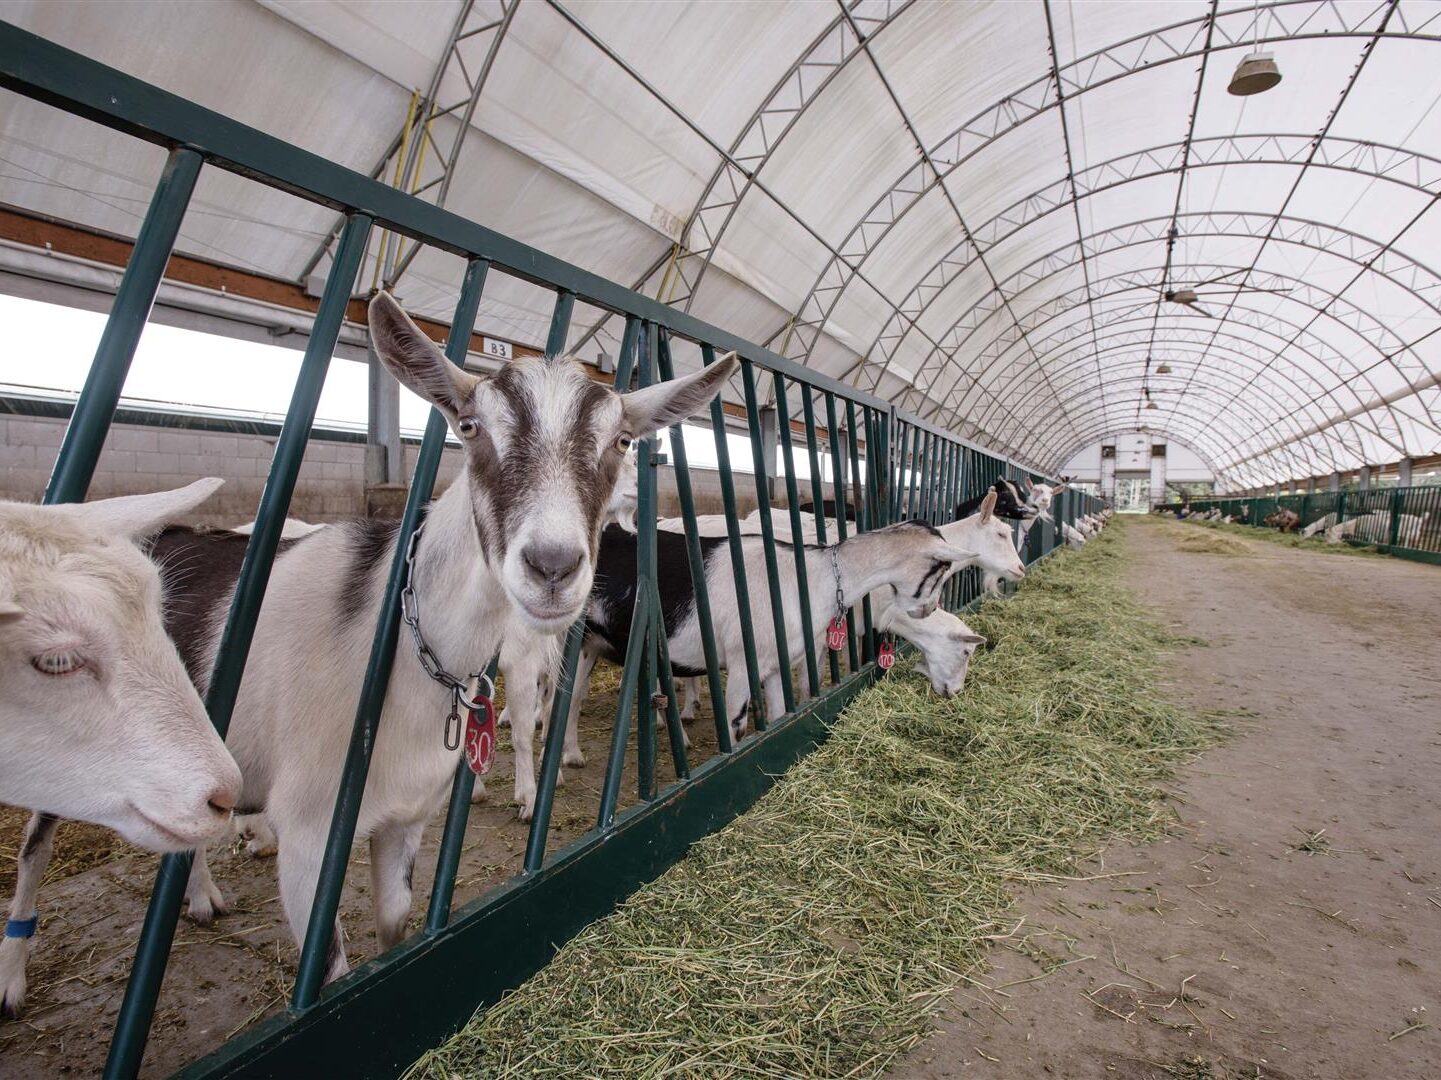 Goats in a white fabric structure